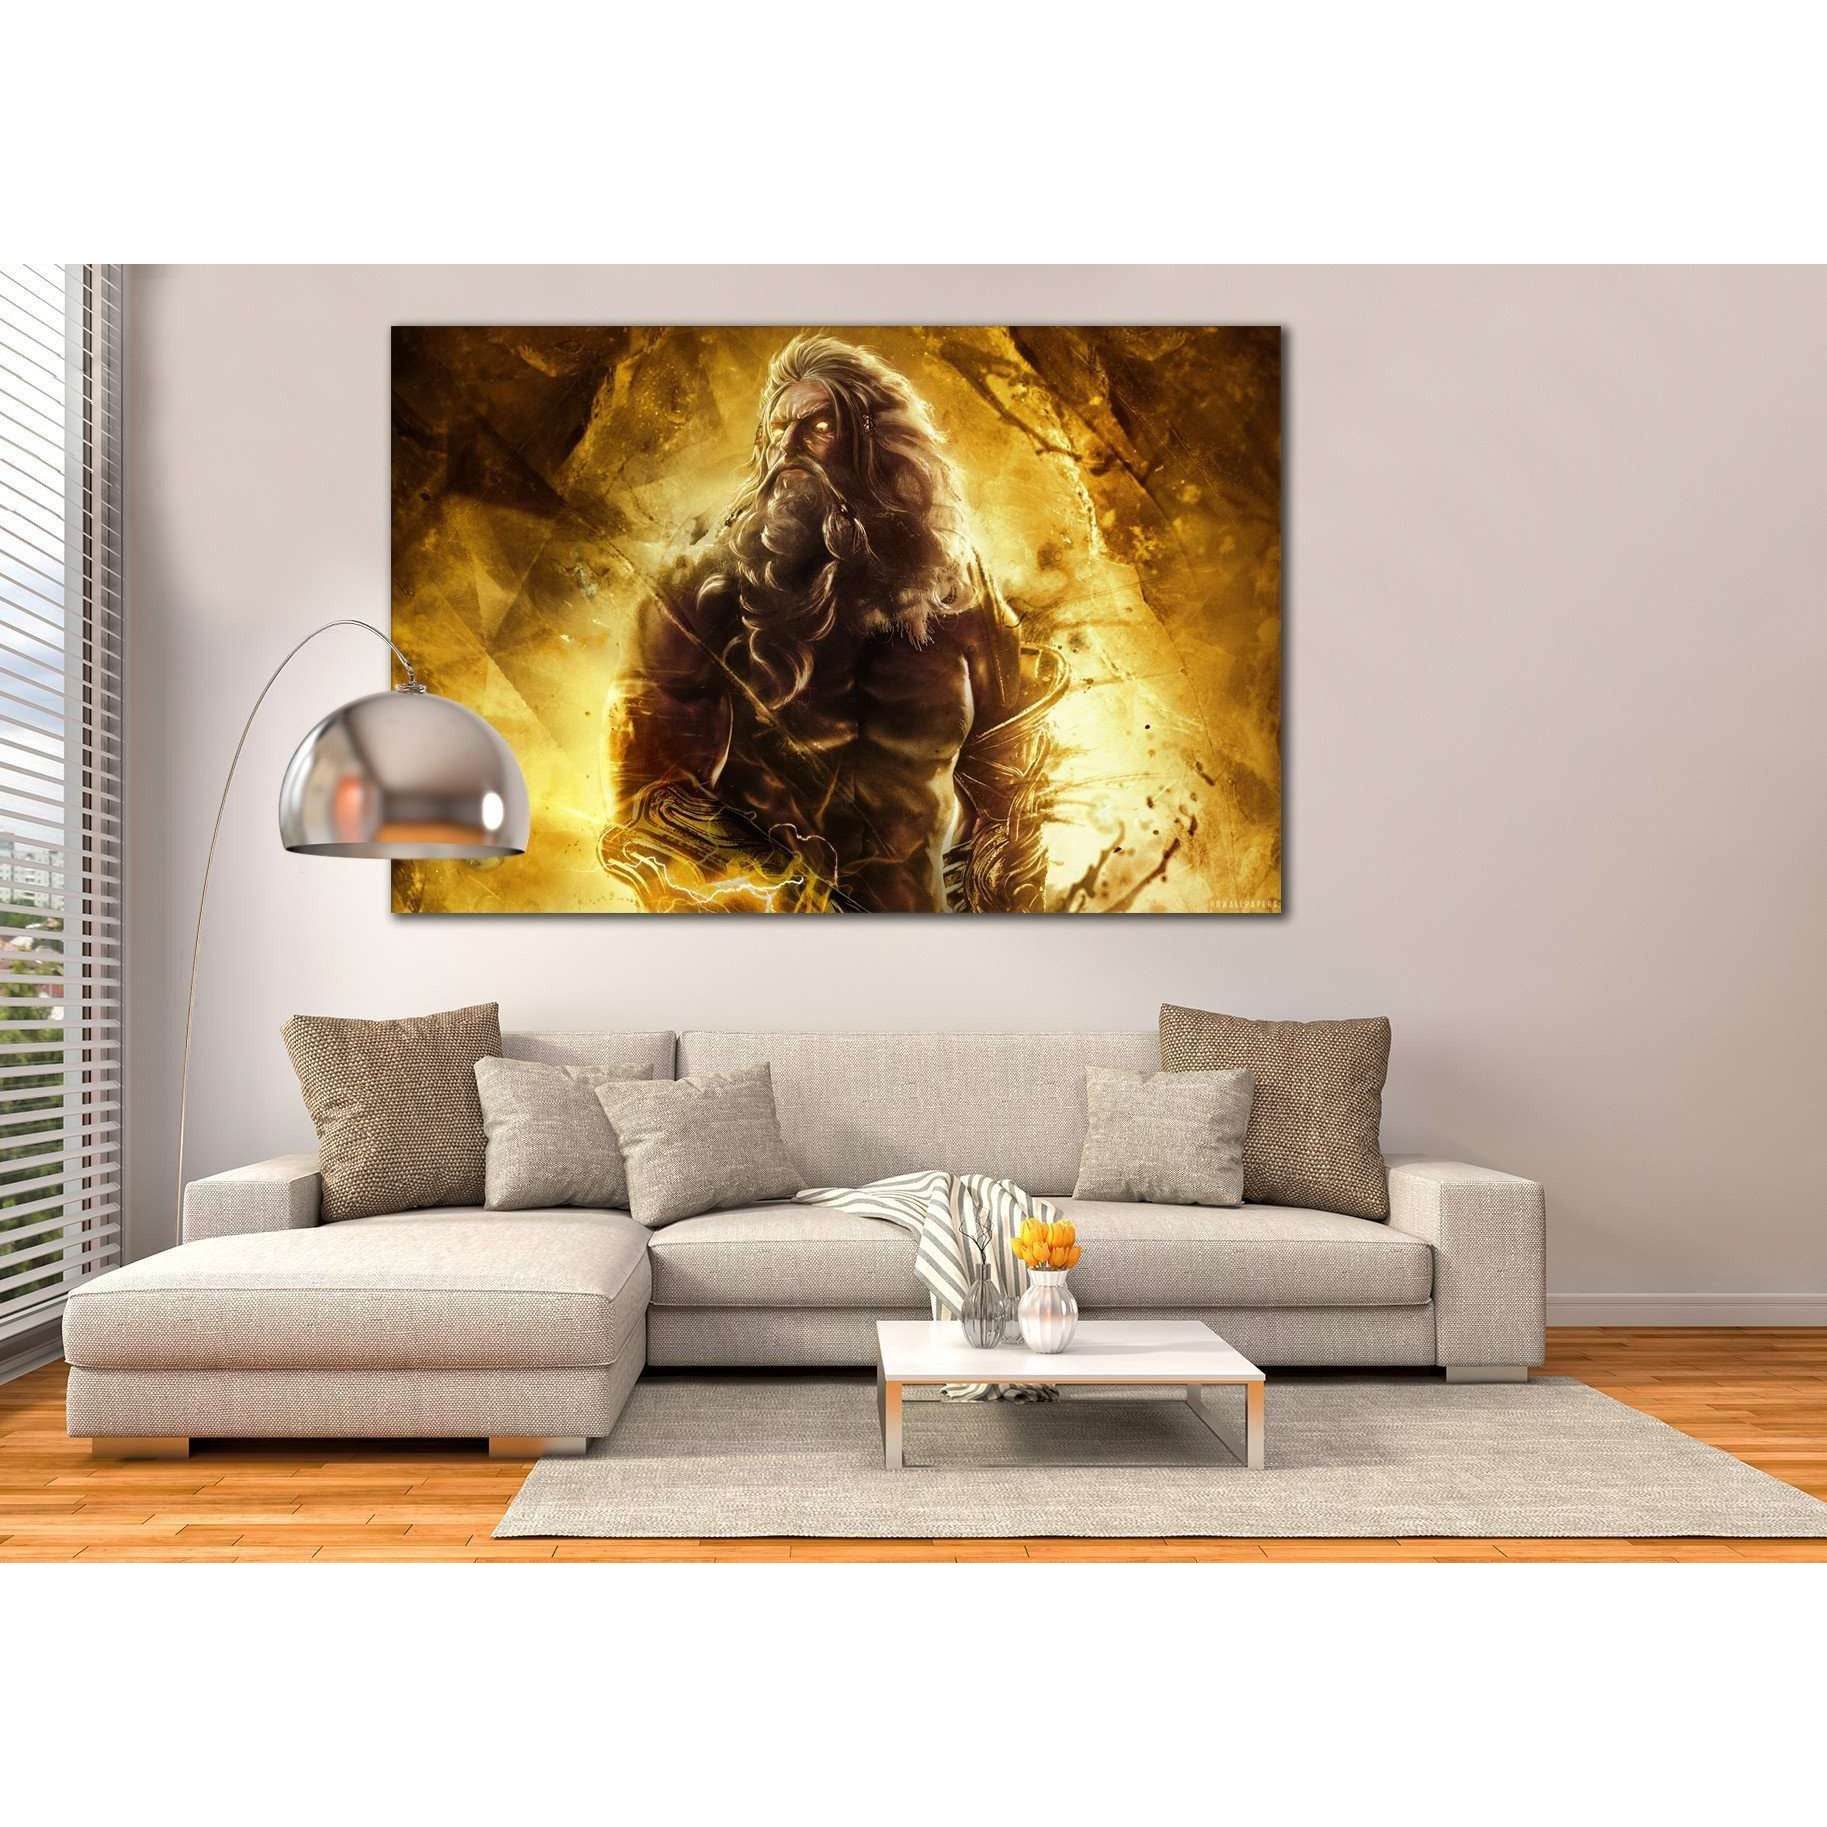 zeus in god of war №2022 Ready to Hang Canvas Print